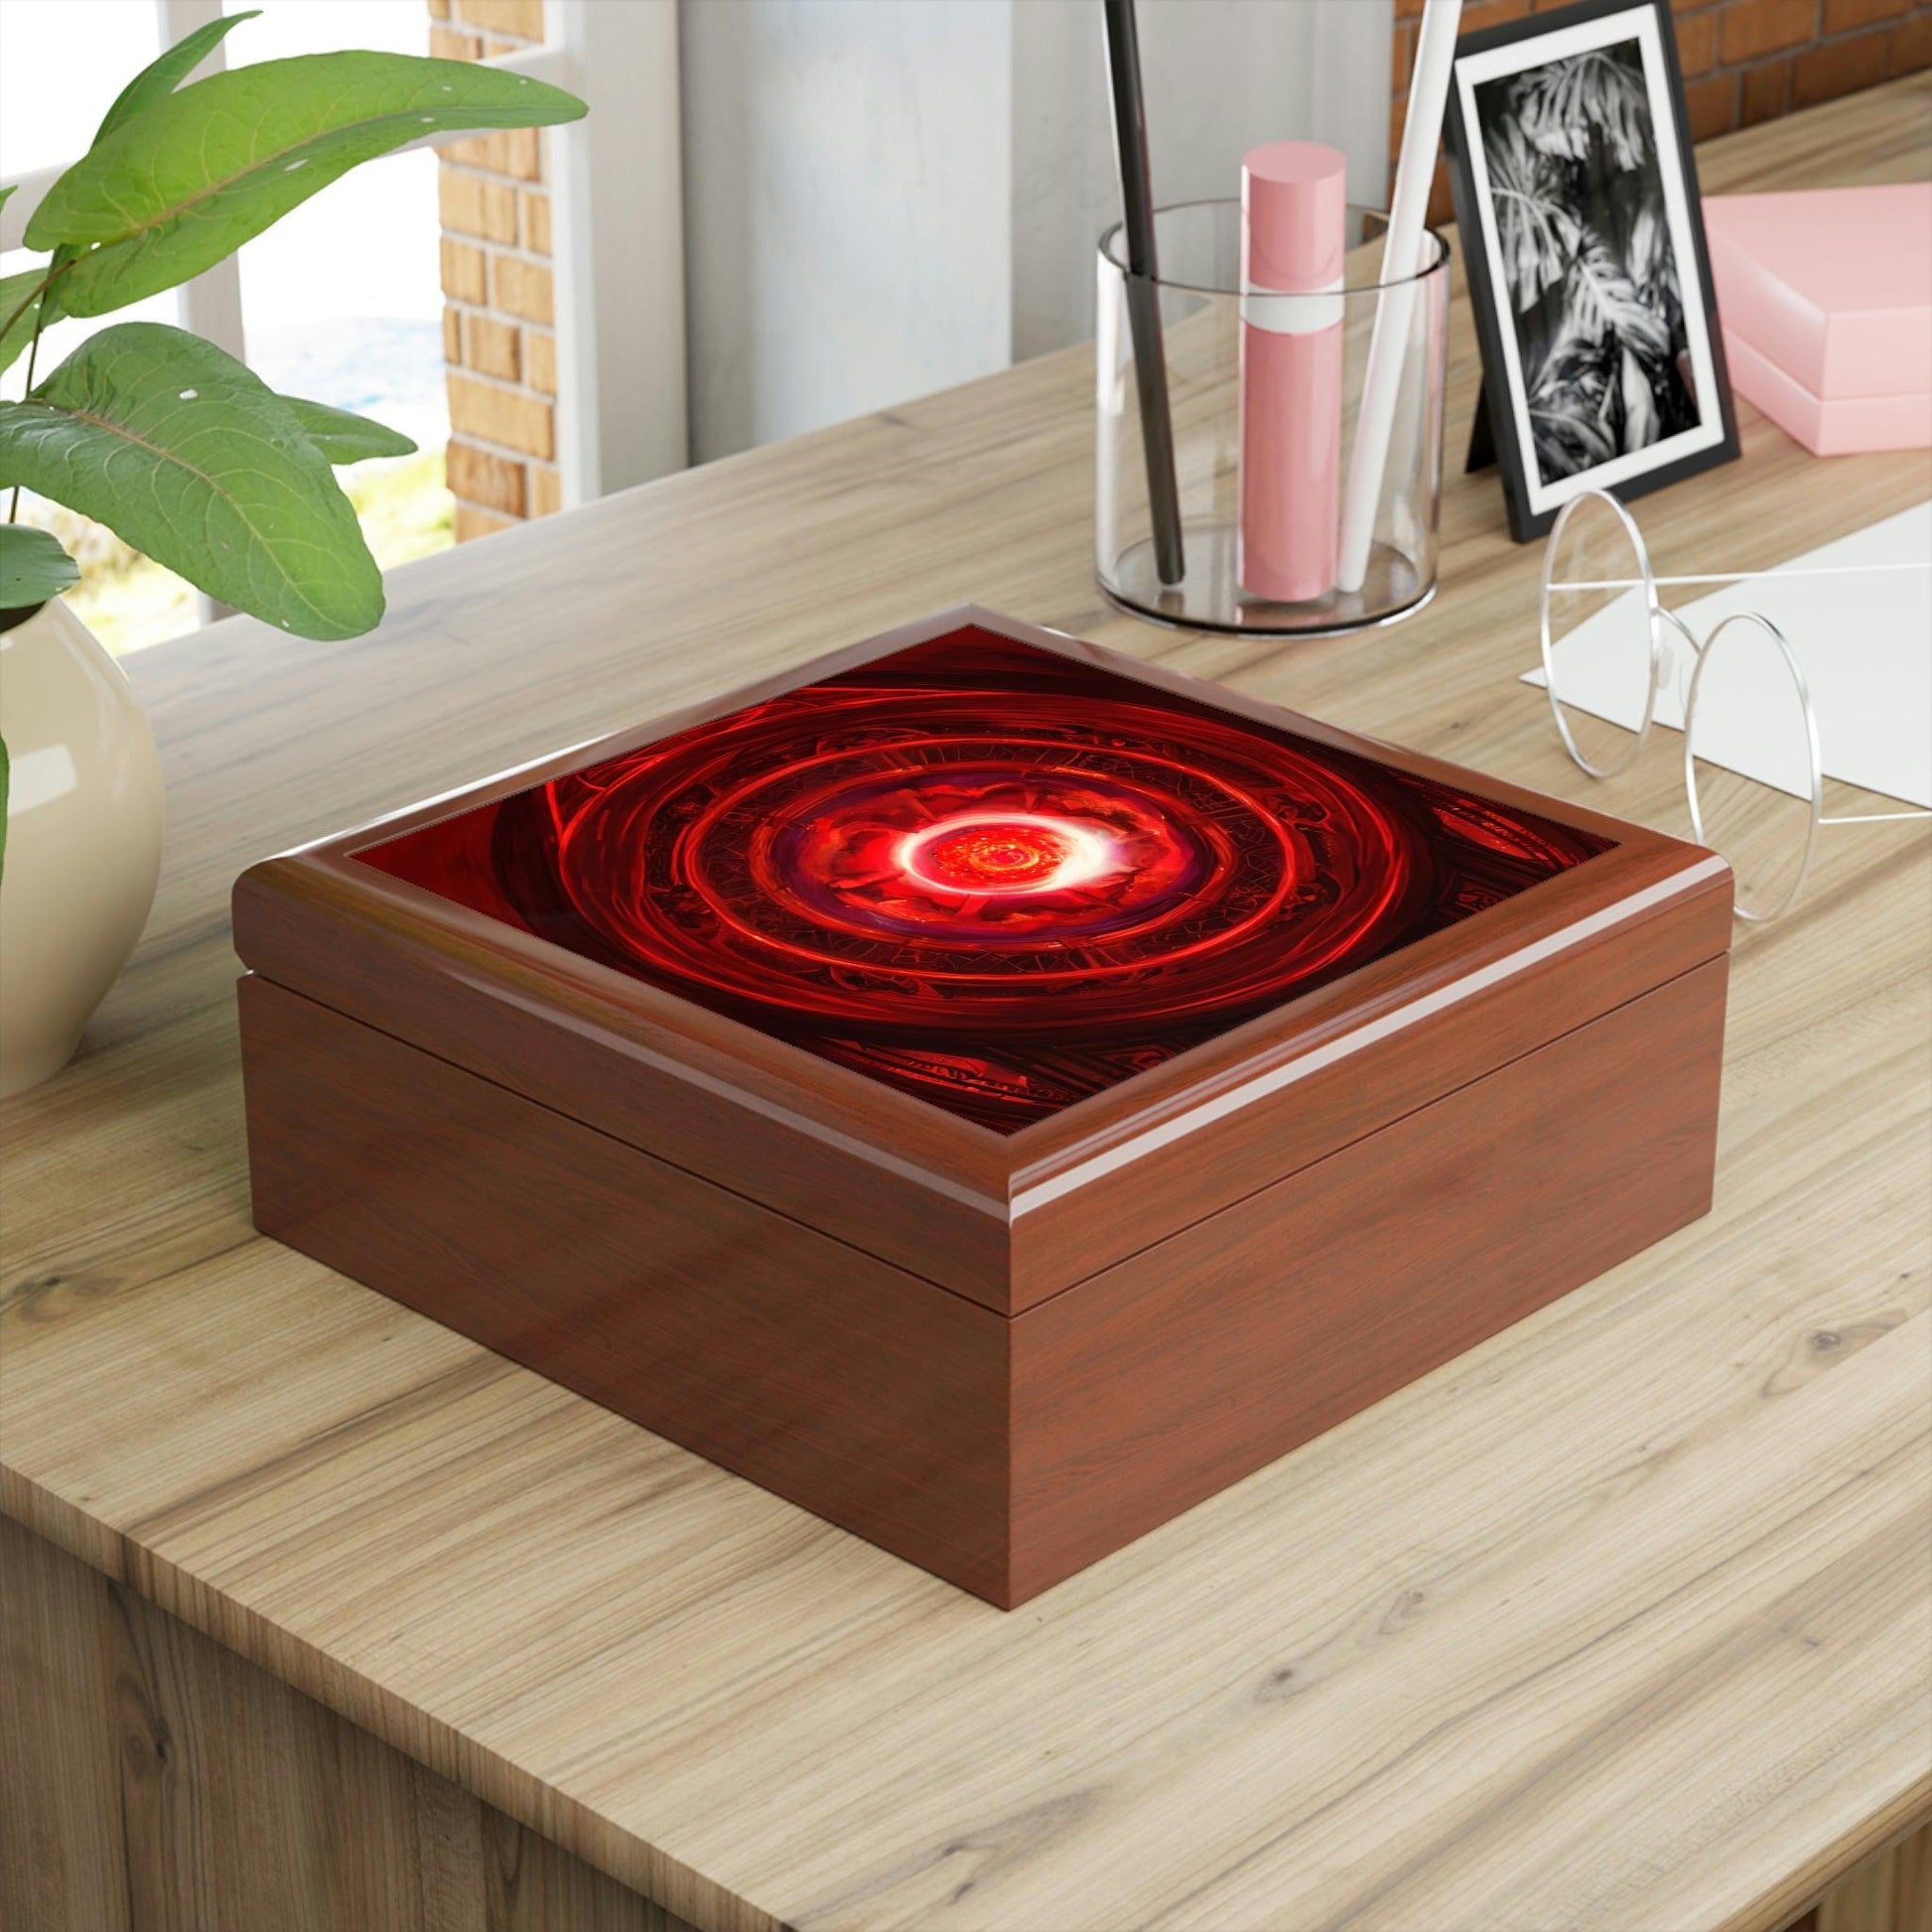 Red-Energy-Portal-Jewelry-Box-to-store-your-talismans-and-rings-5